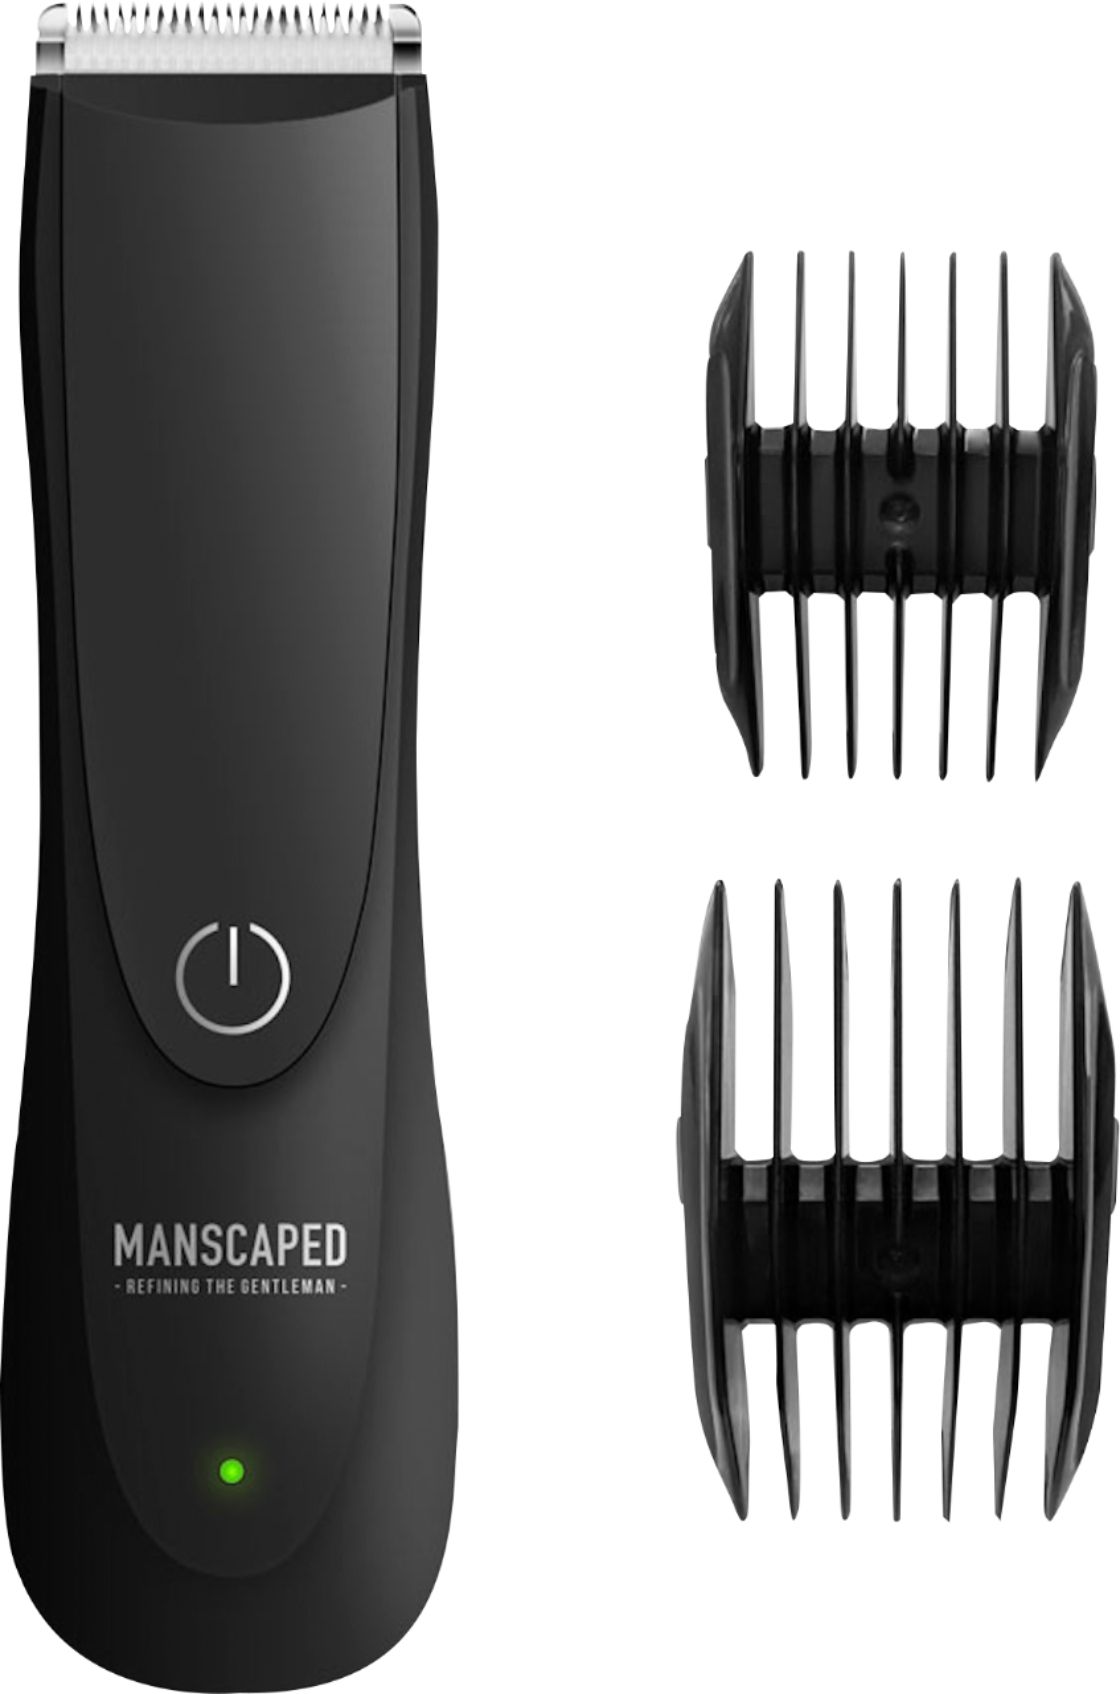 manscaped lawn mower 2.0 price